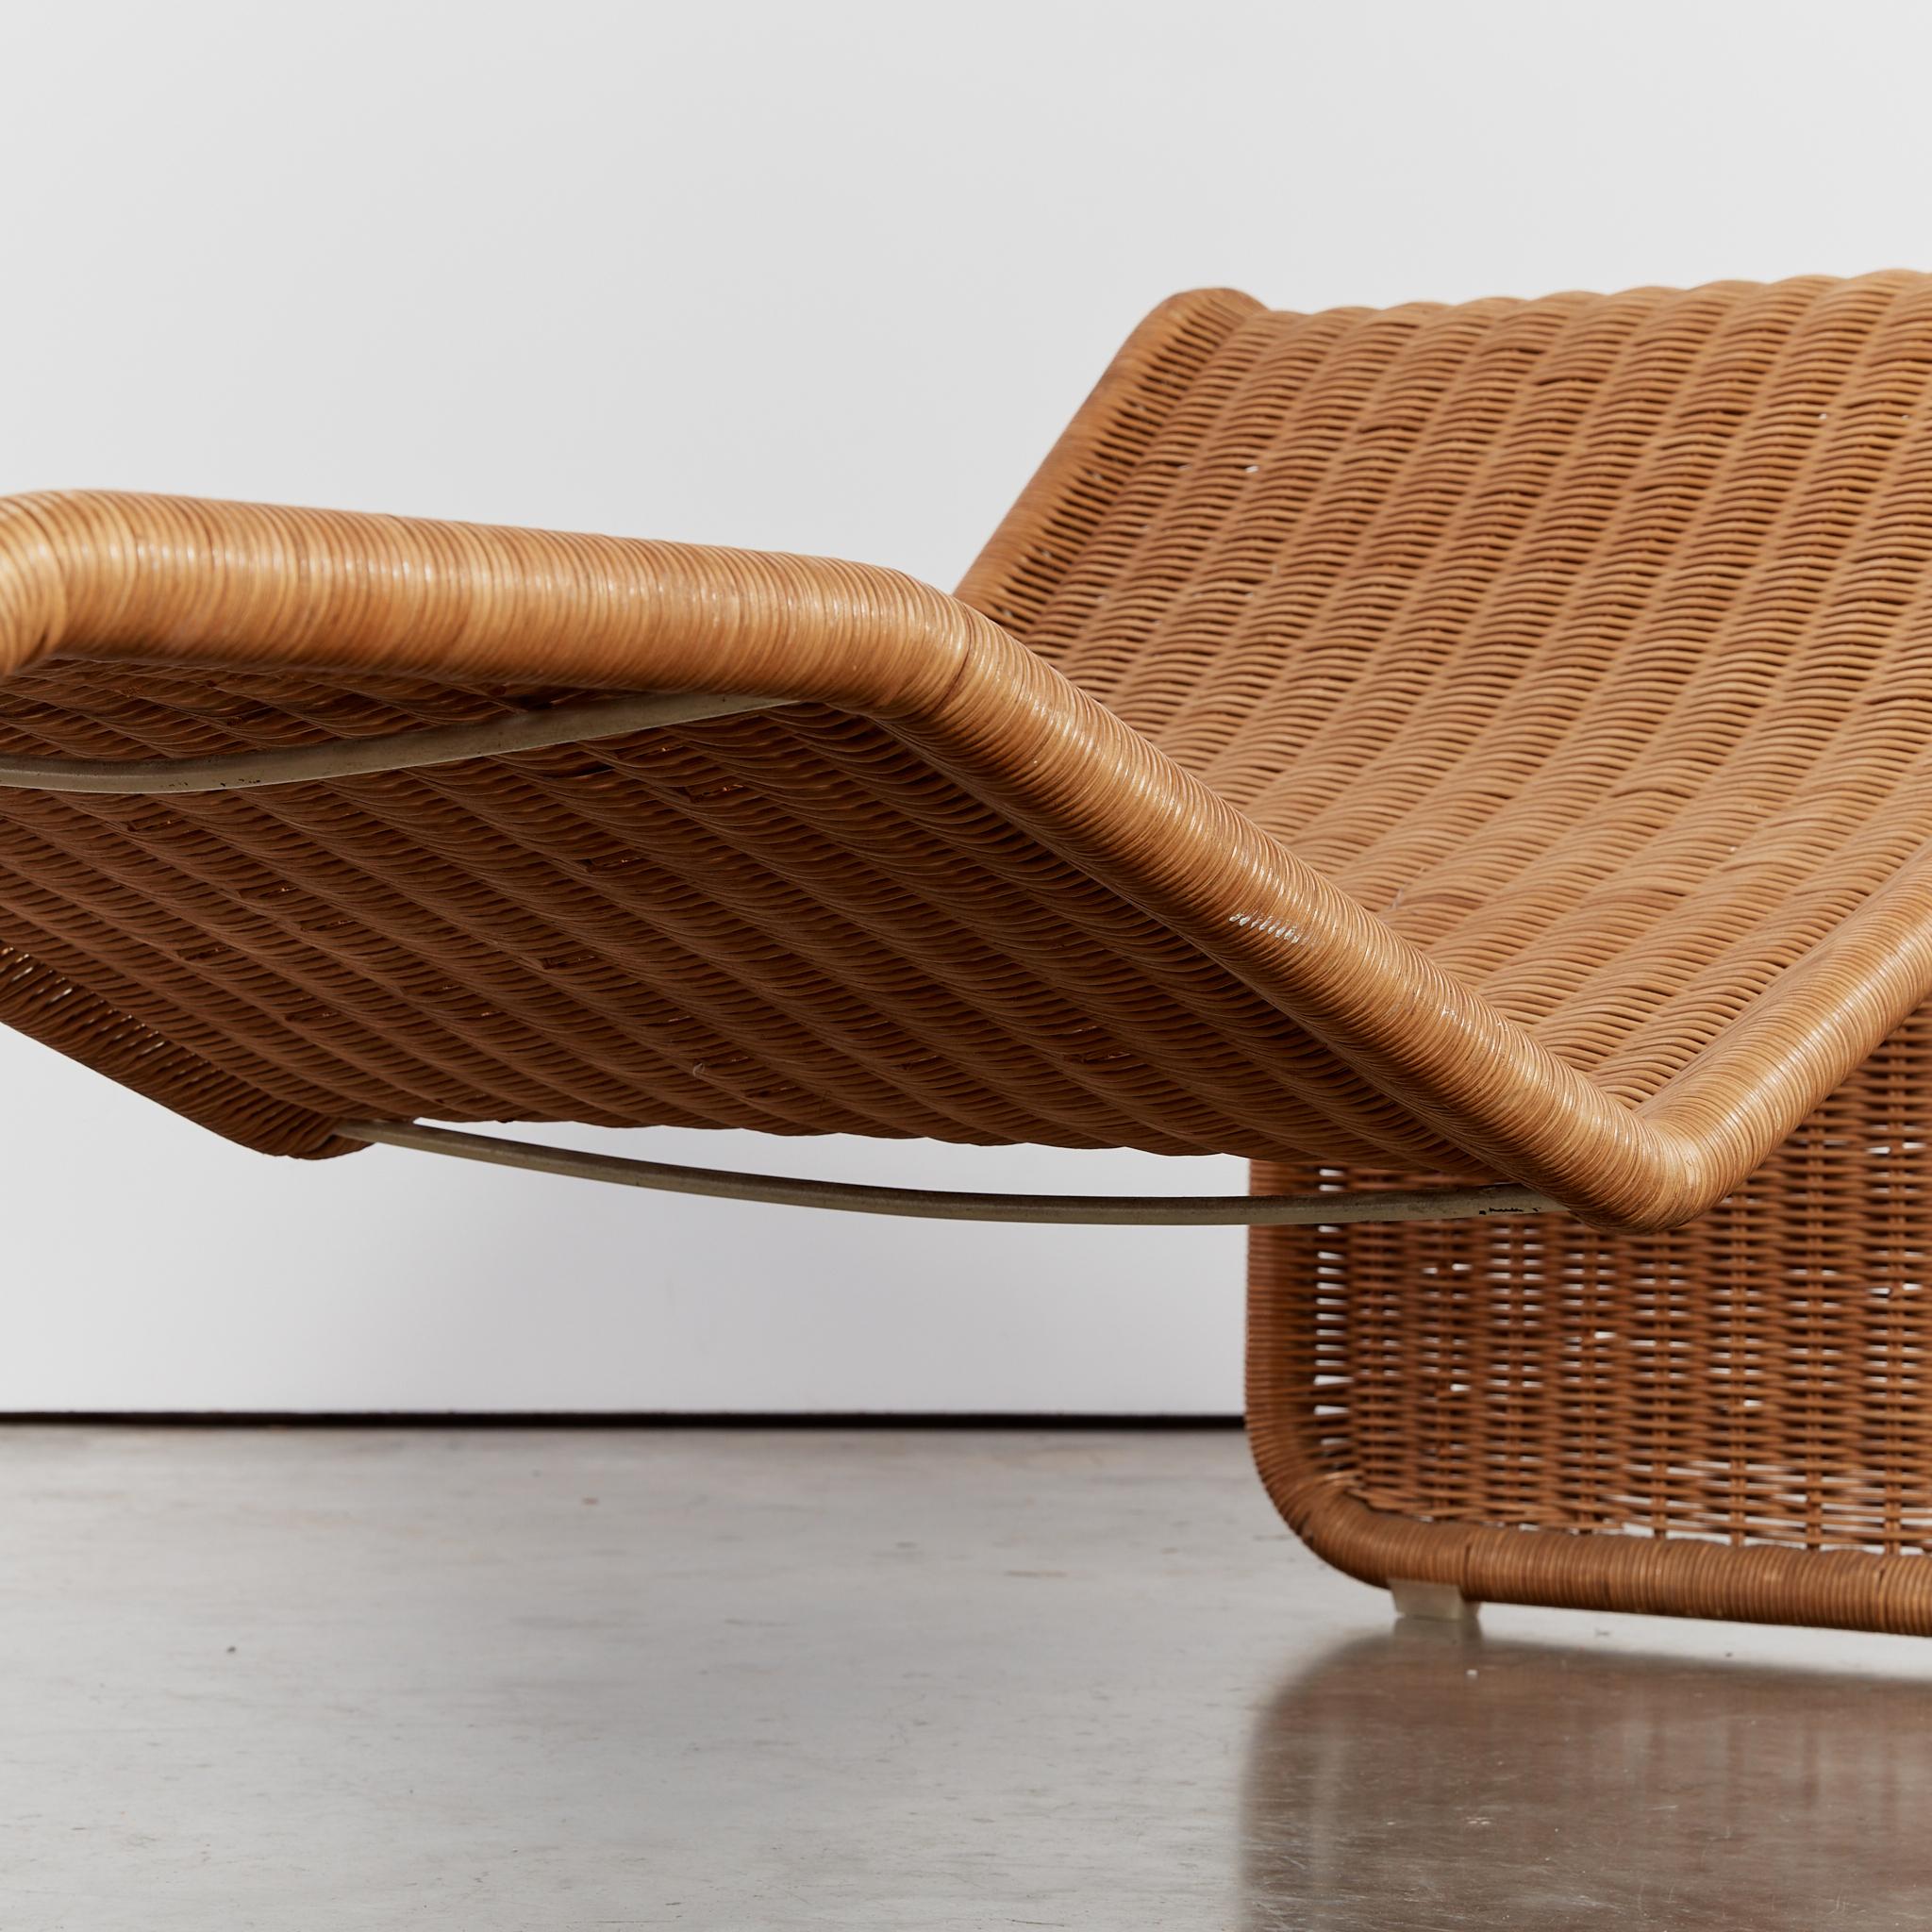 Rare P3 rattan chaise lounge chair by Tito Agnoli for Bocacina 1960's For Sale 4